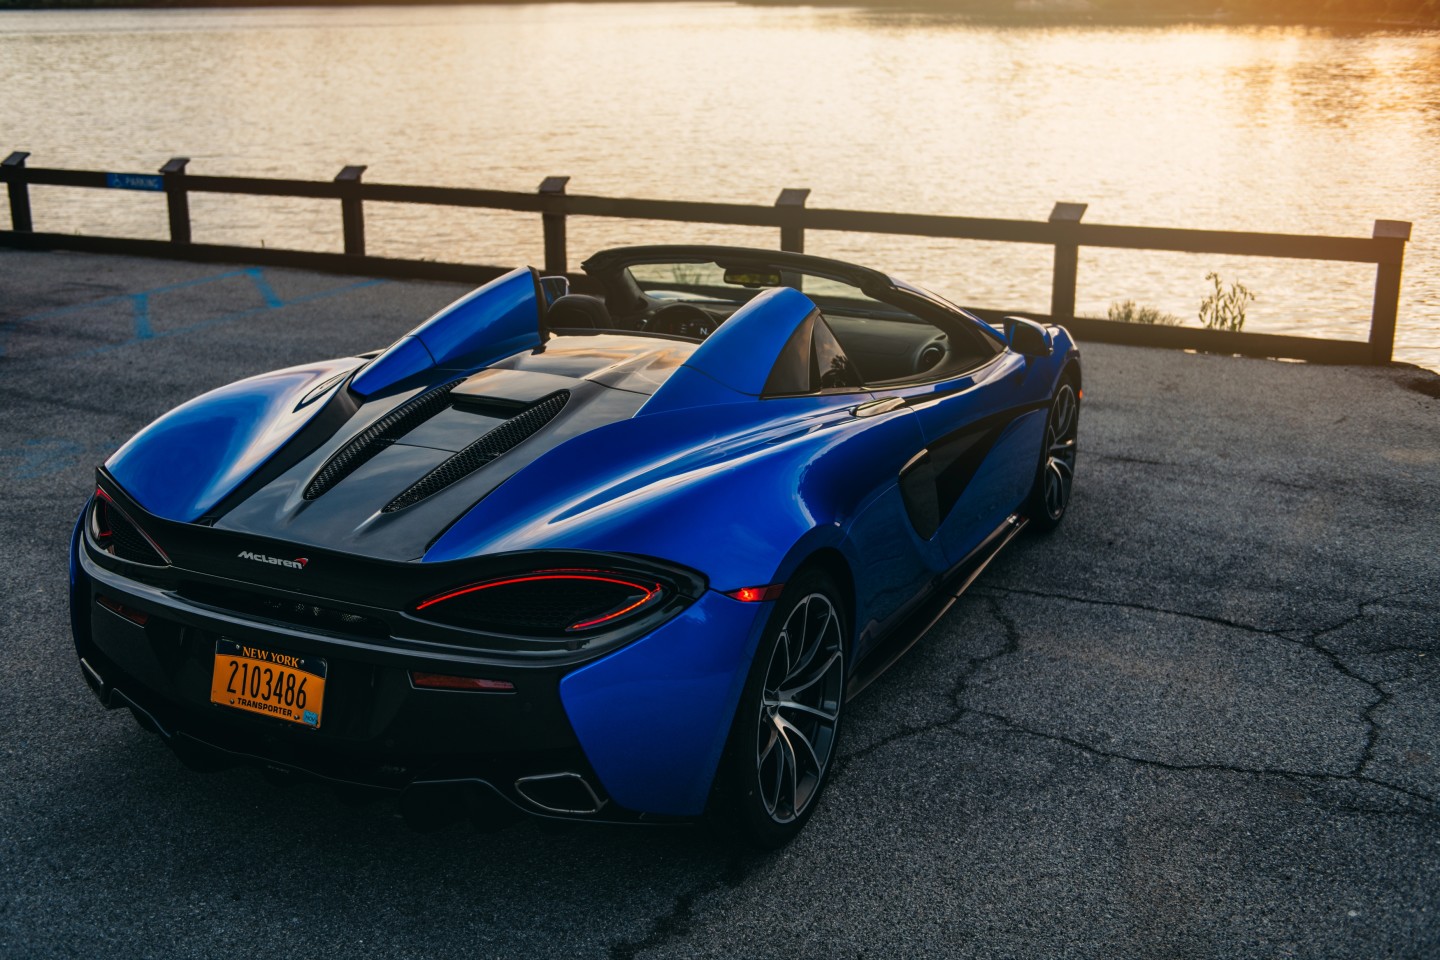 Although cruising is what the 570S is made for, it's also highly photogenic at a standstill